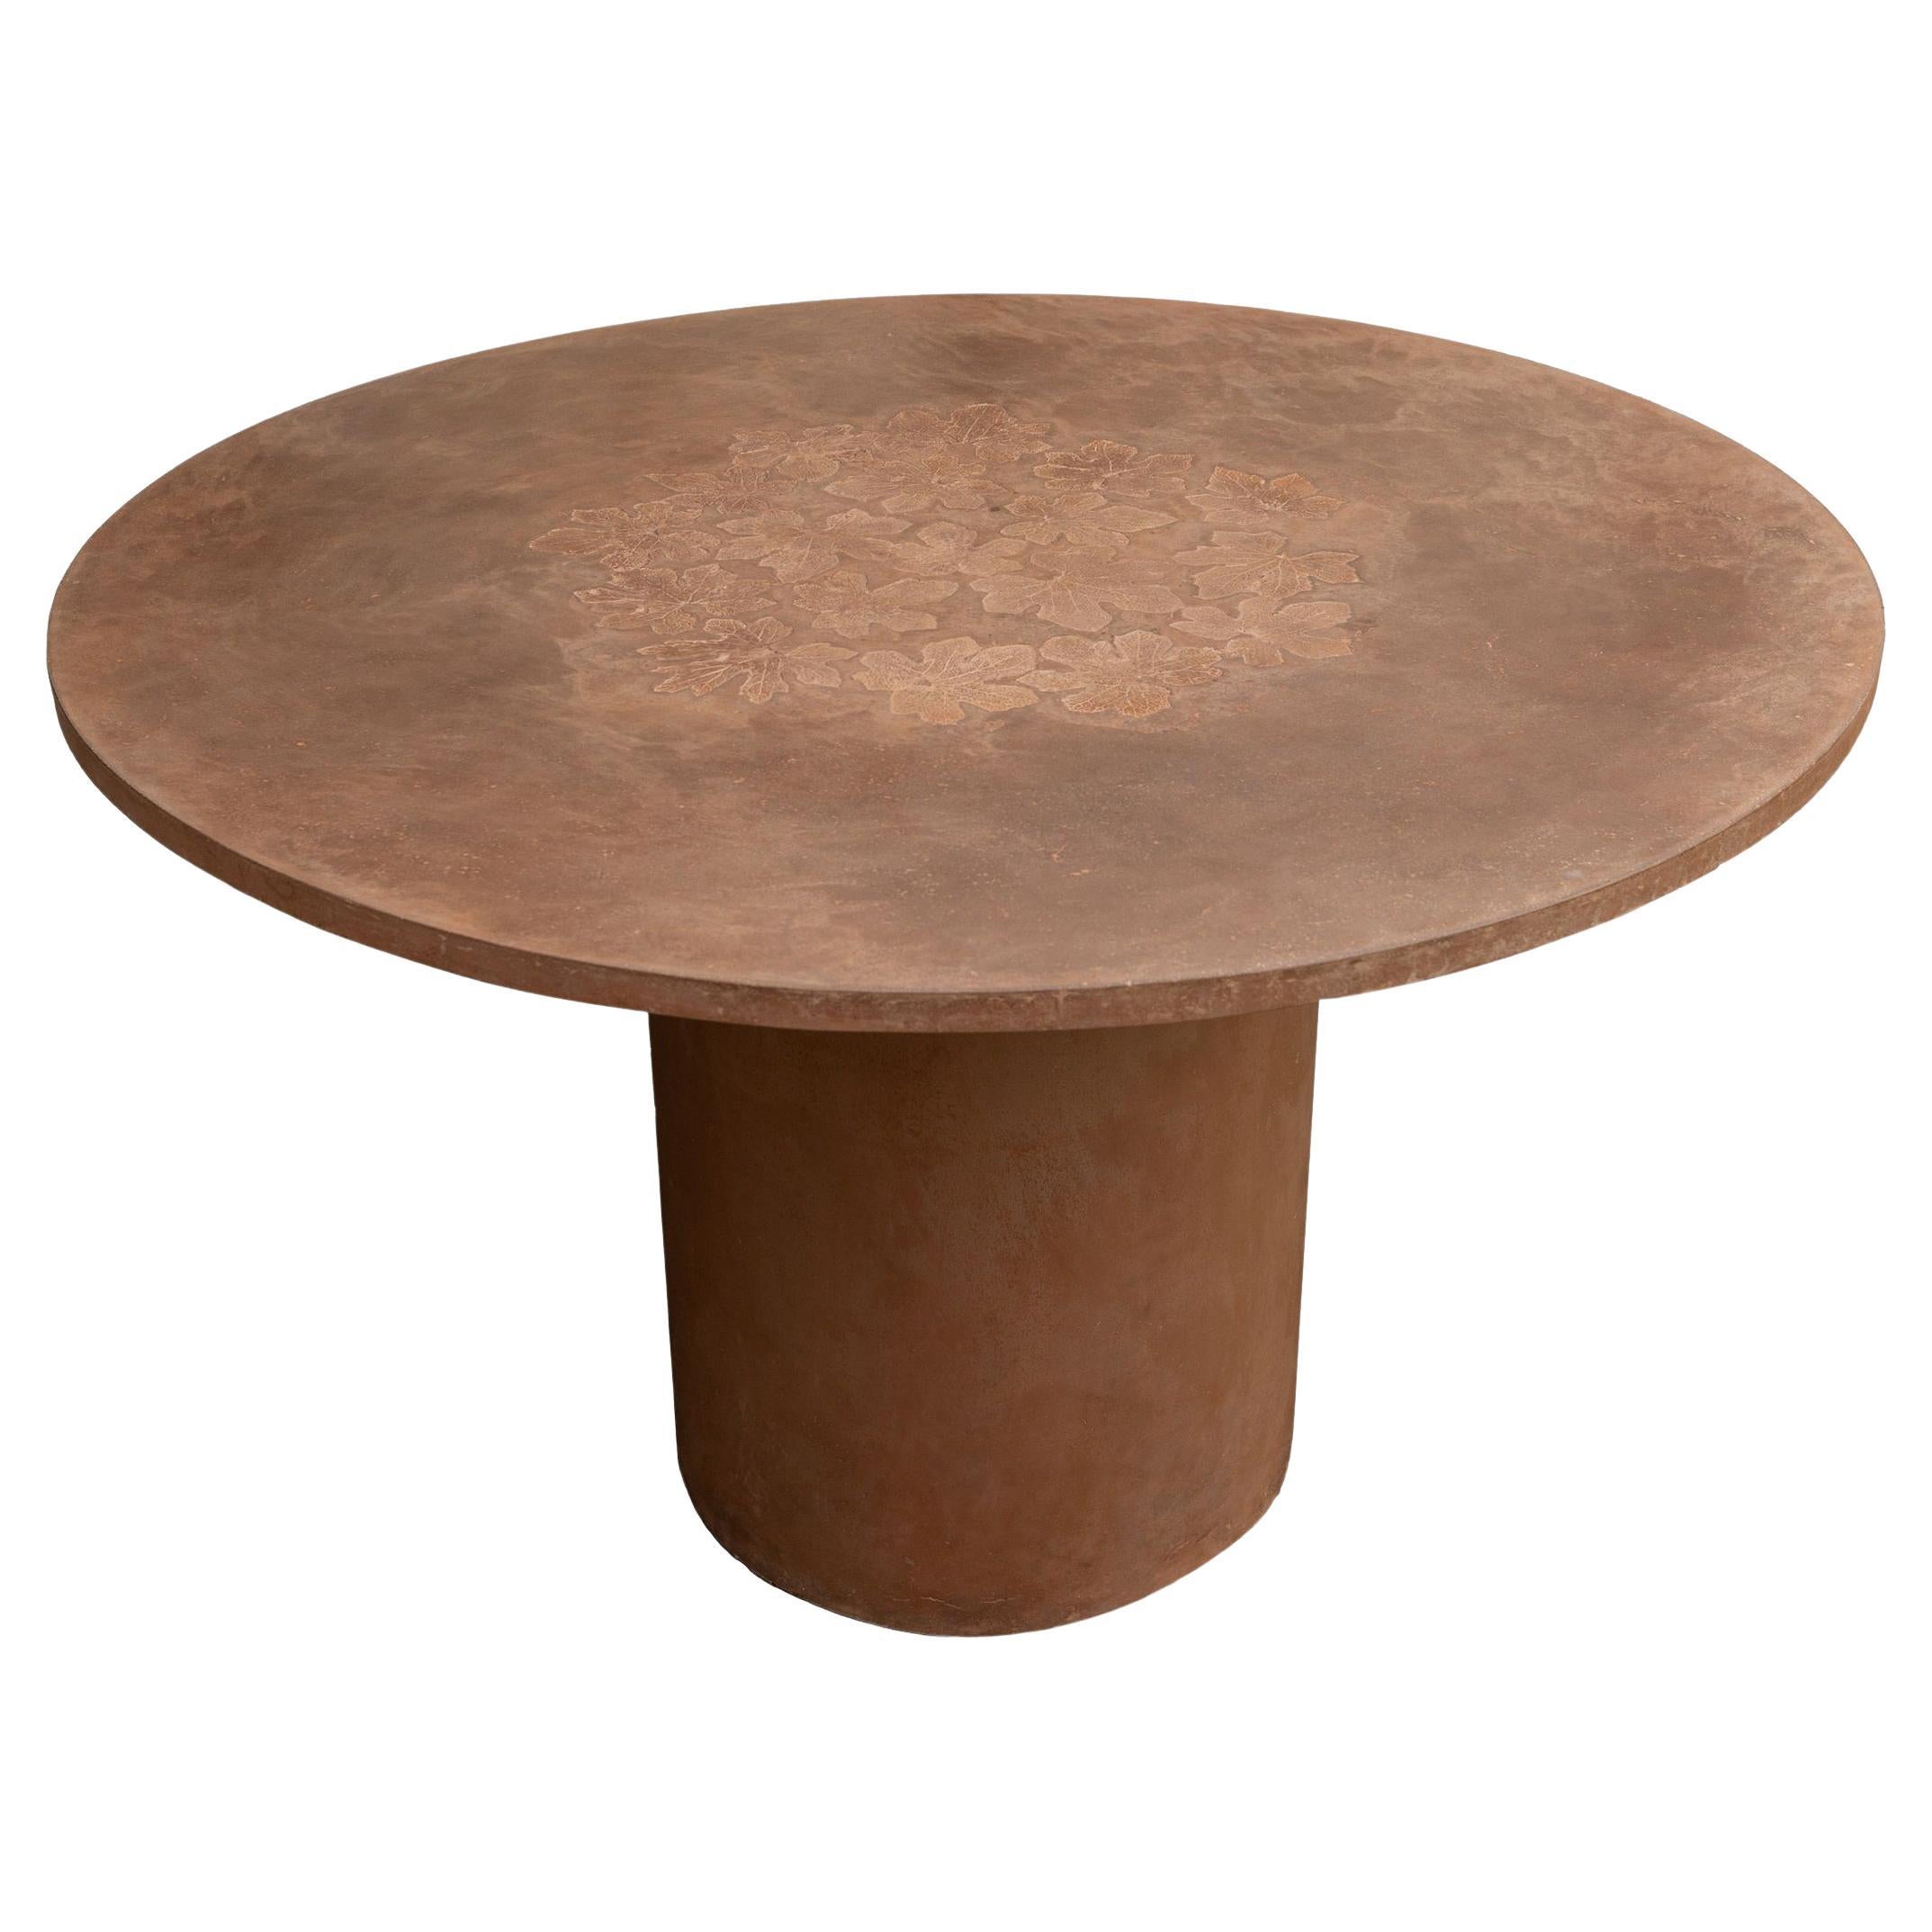 Customizable Concrete Round Pillar Dining Tables For Sale